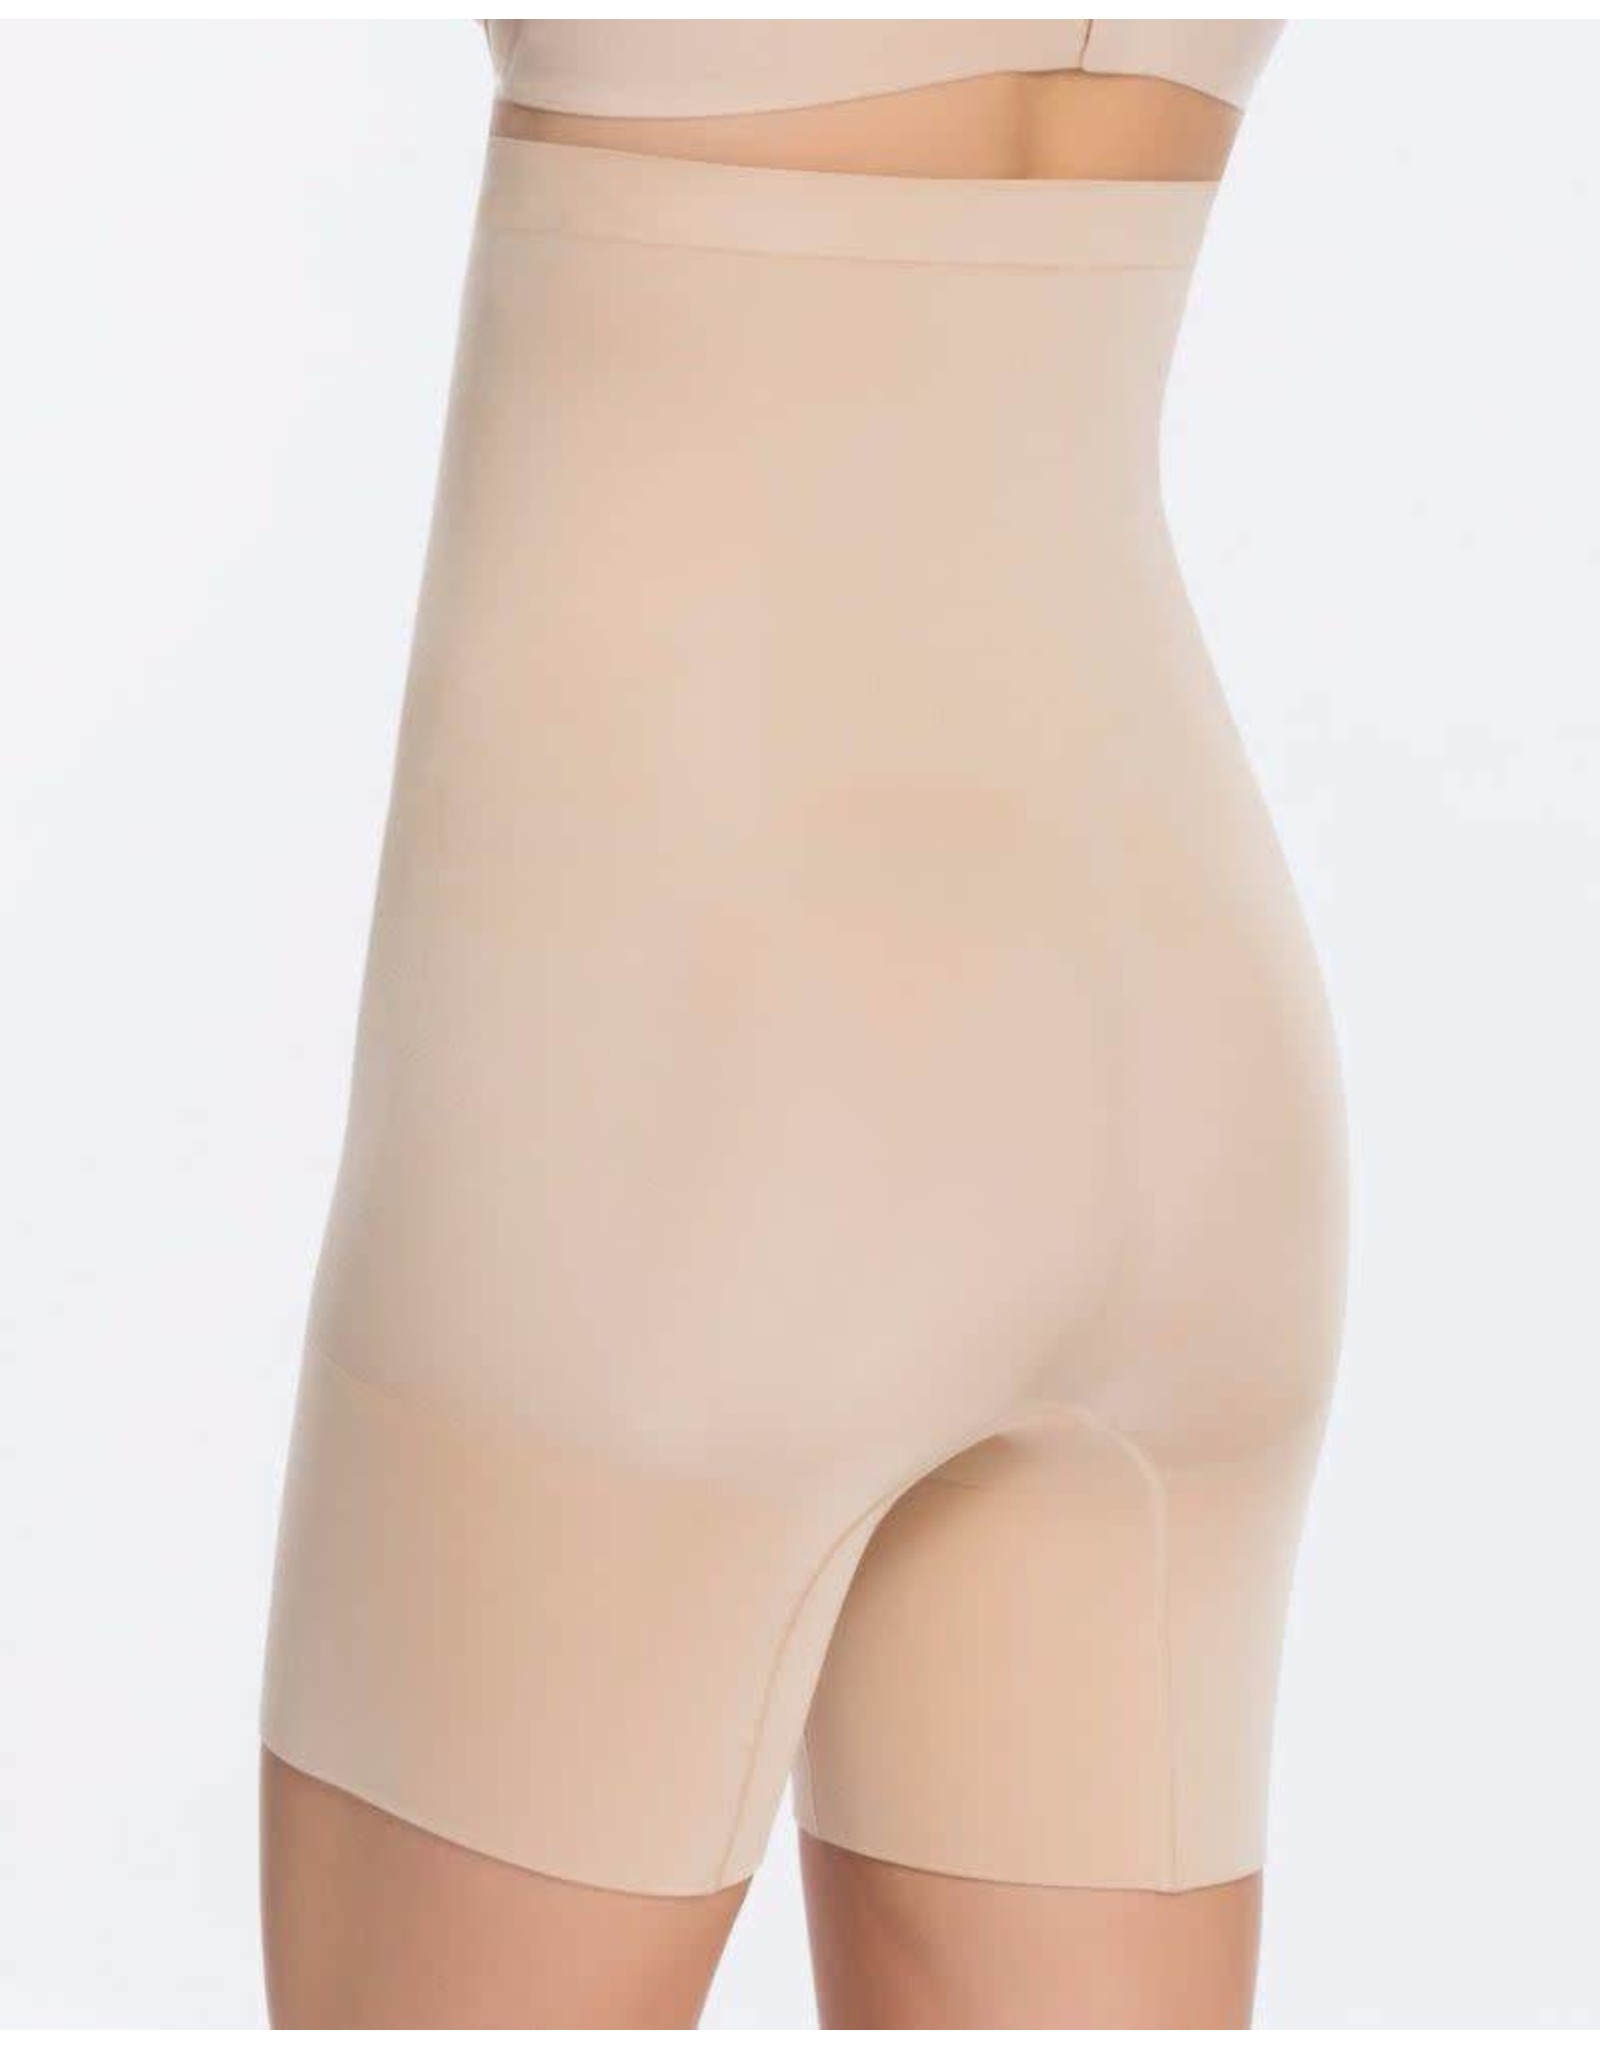 SPANX Short Leg Girdle with Word of Honor Décolletage 10156R